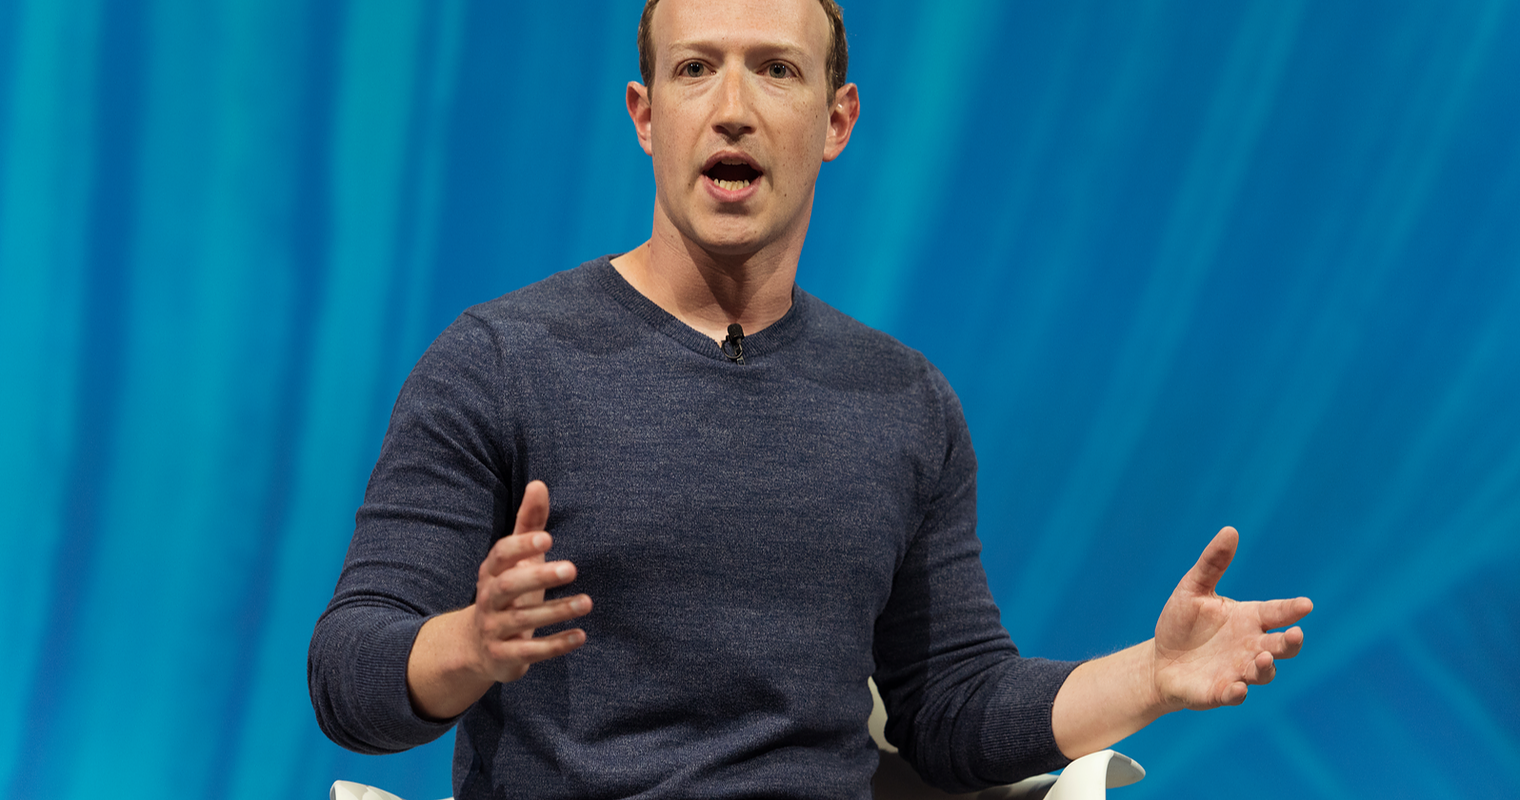 Did Facebook Change Its Name? Yes, It’s Now “Meta”